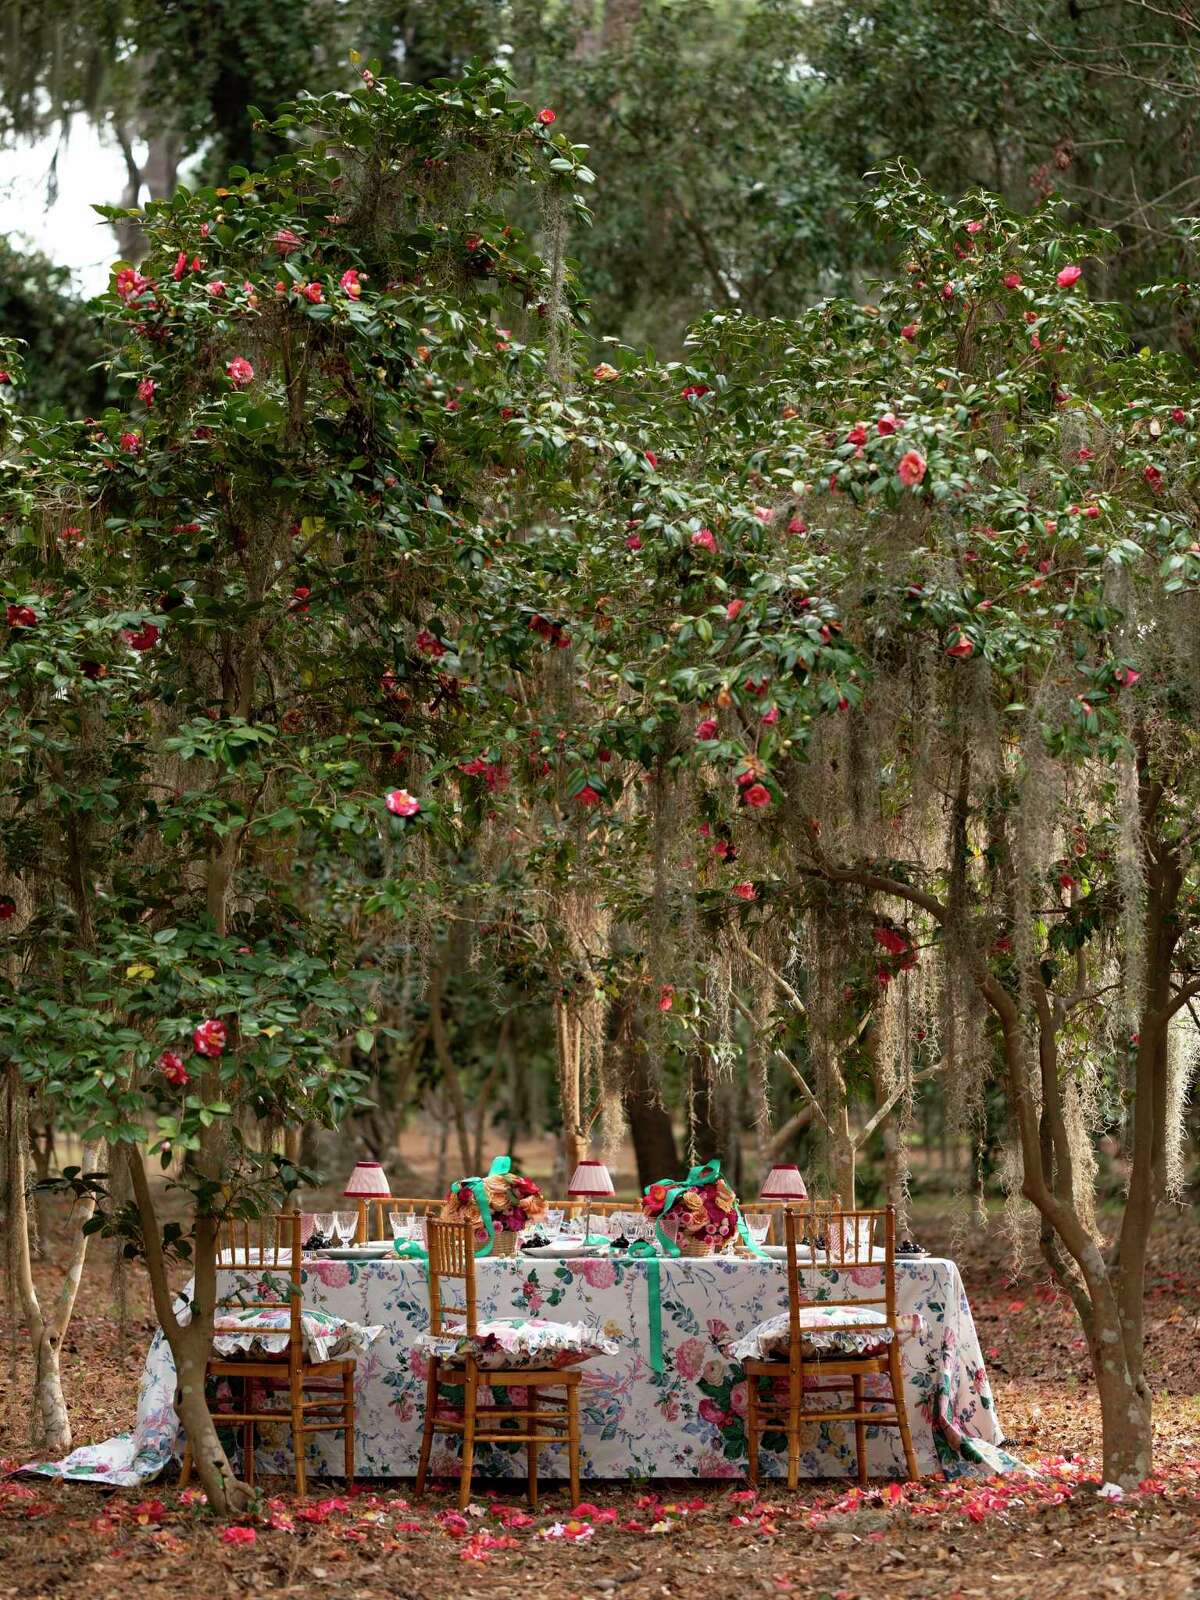 Savannah event planner Rebecca Gardner will have a retail site, called Houses & Parties, at Blue Hills during the 2023 spring antique shows in Round Top.